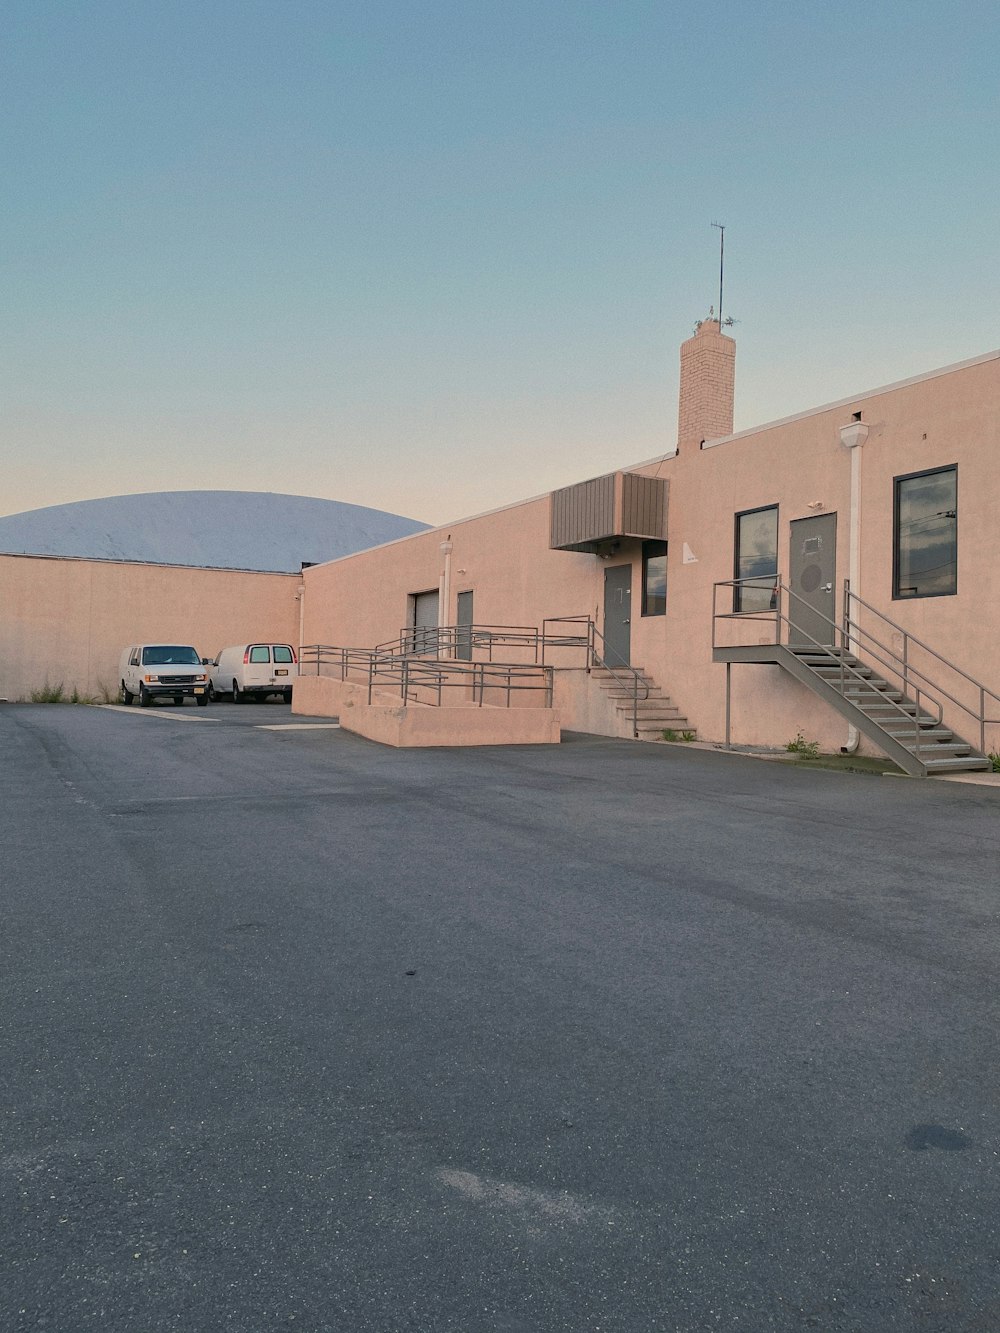 white car parked beside beige concrete building during daytime